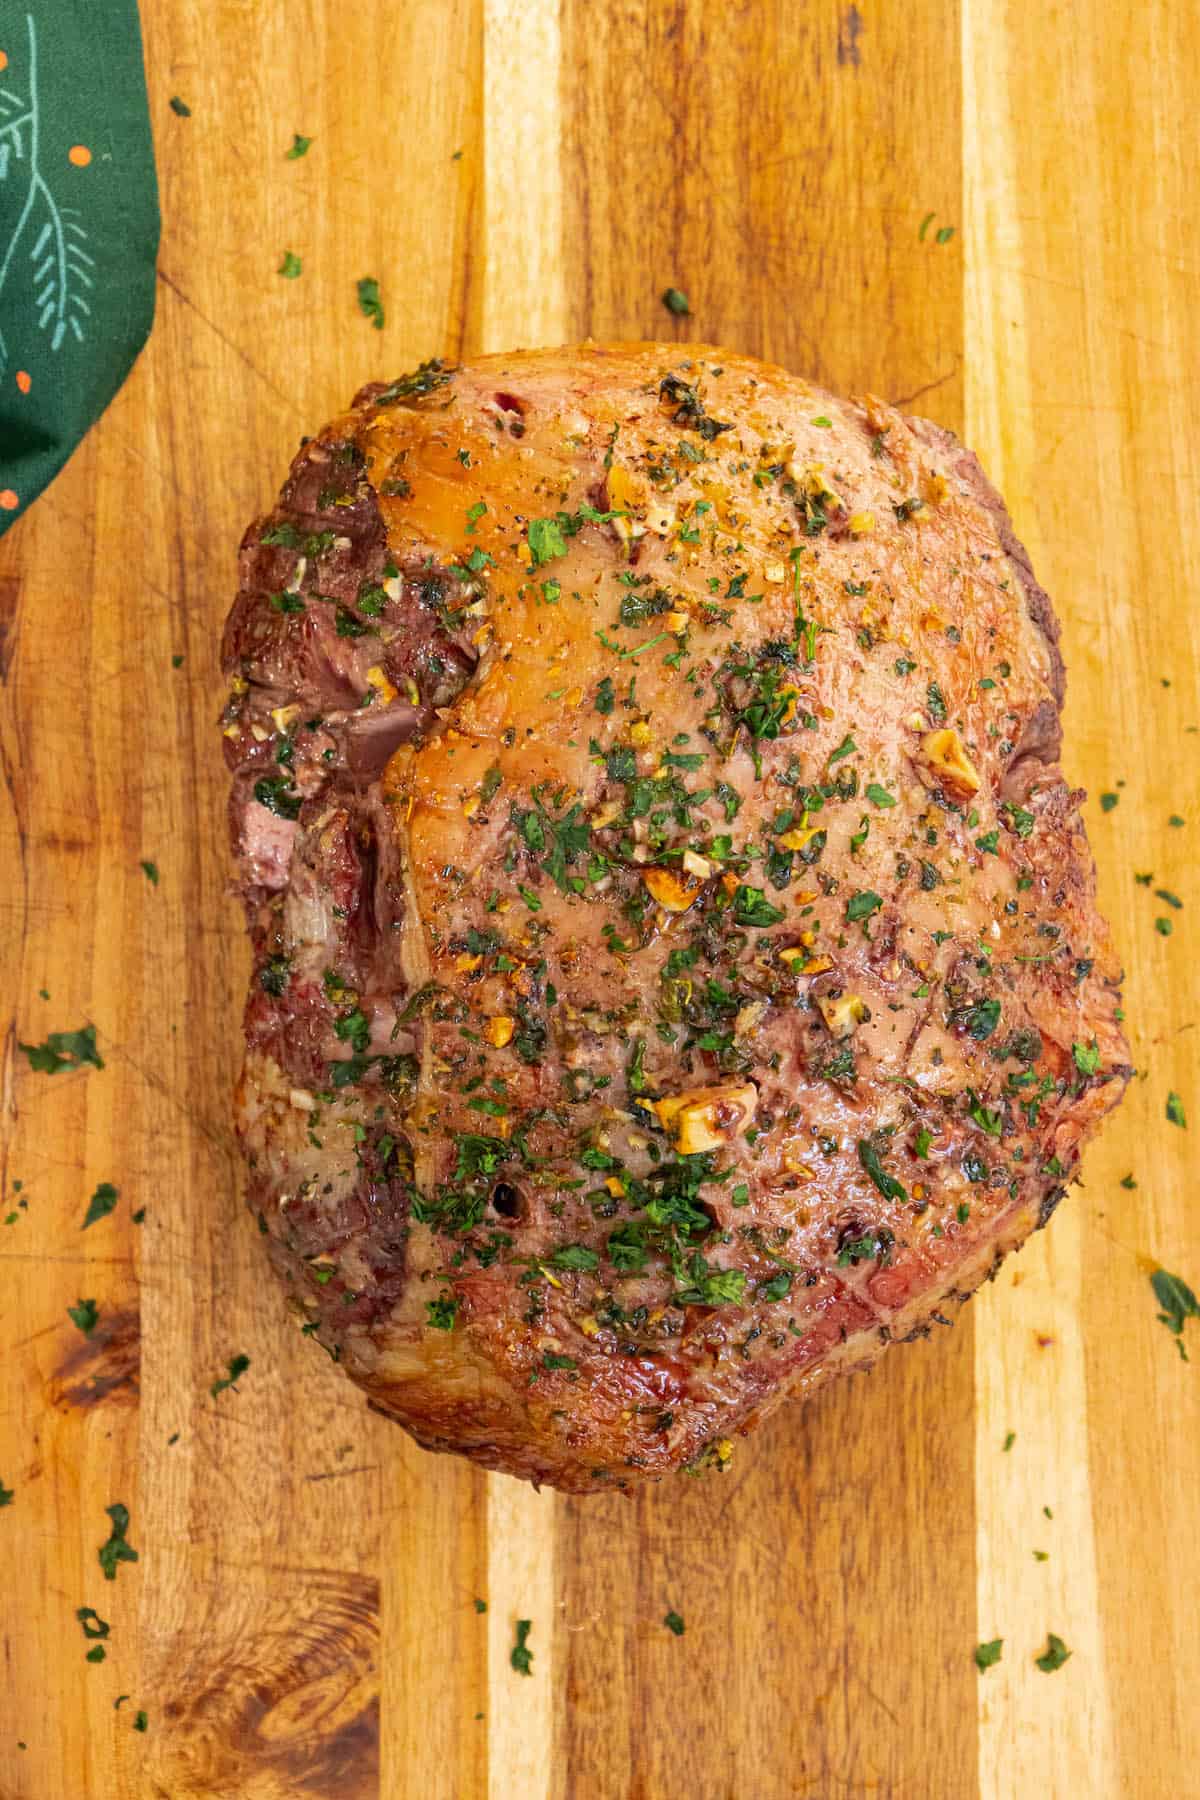 A Reverse Seared Leg of Lamb with herbs on a wooden cutting board.